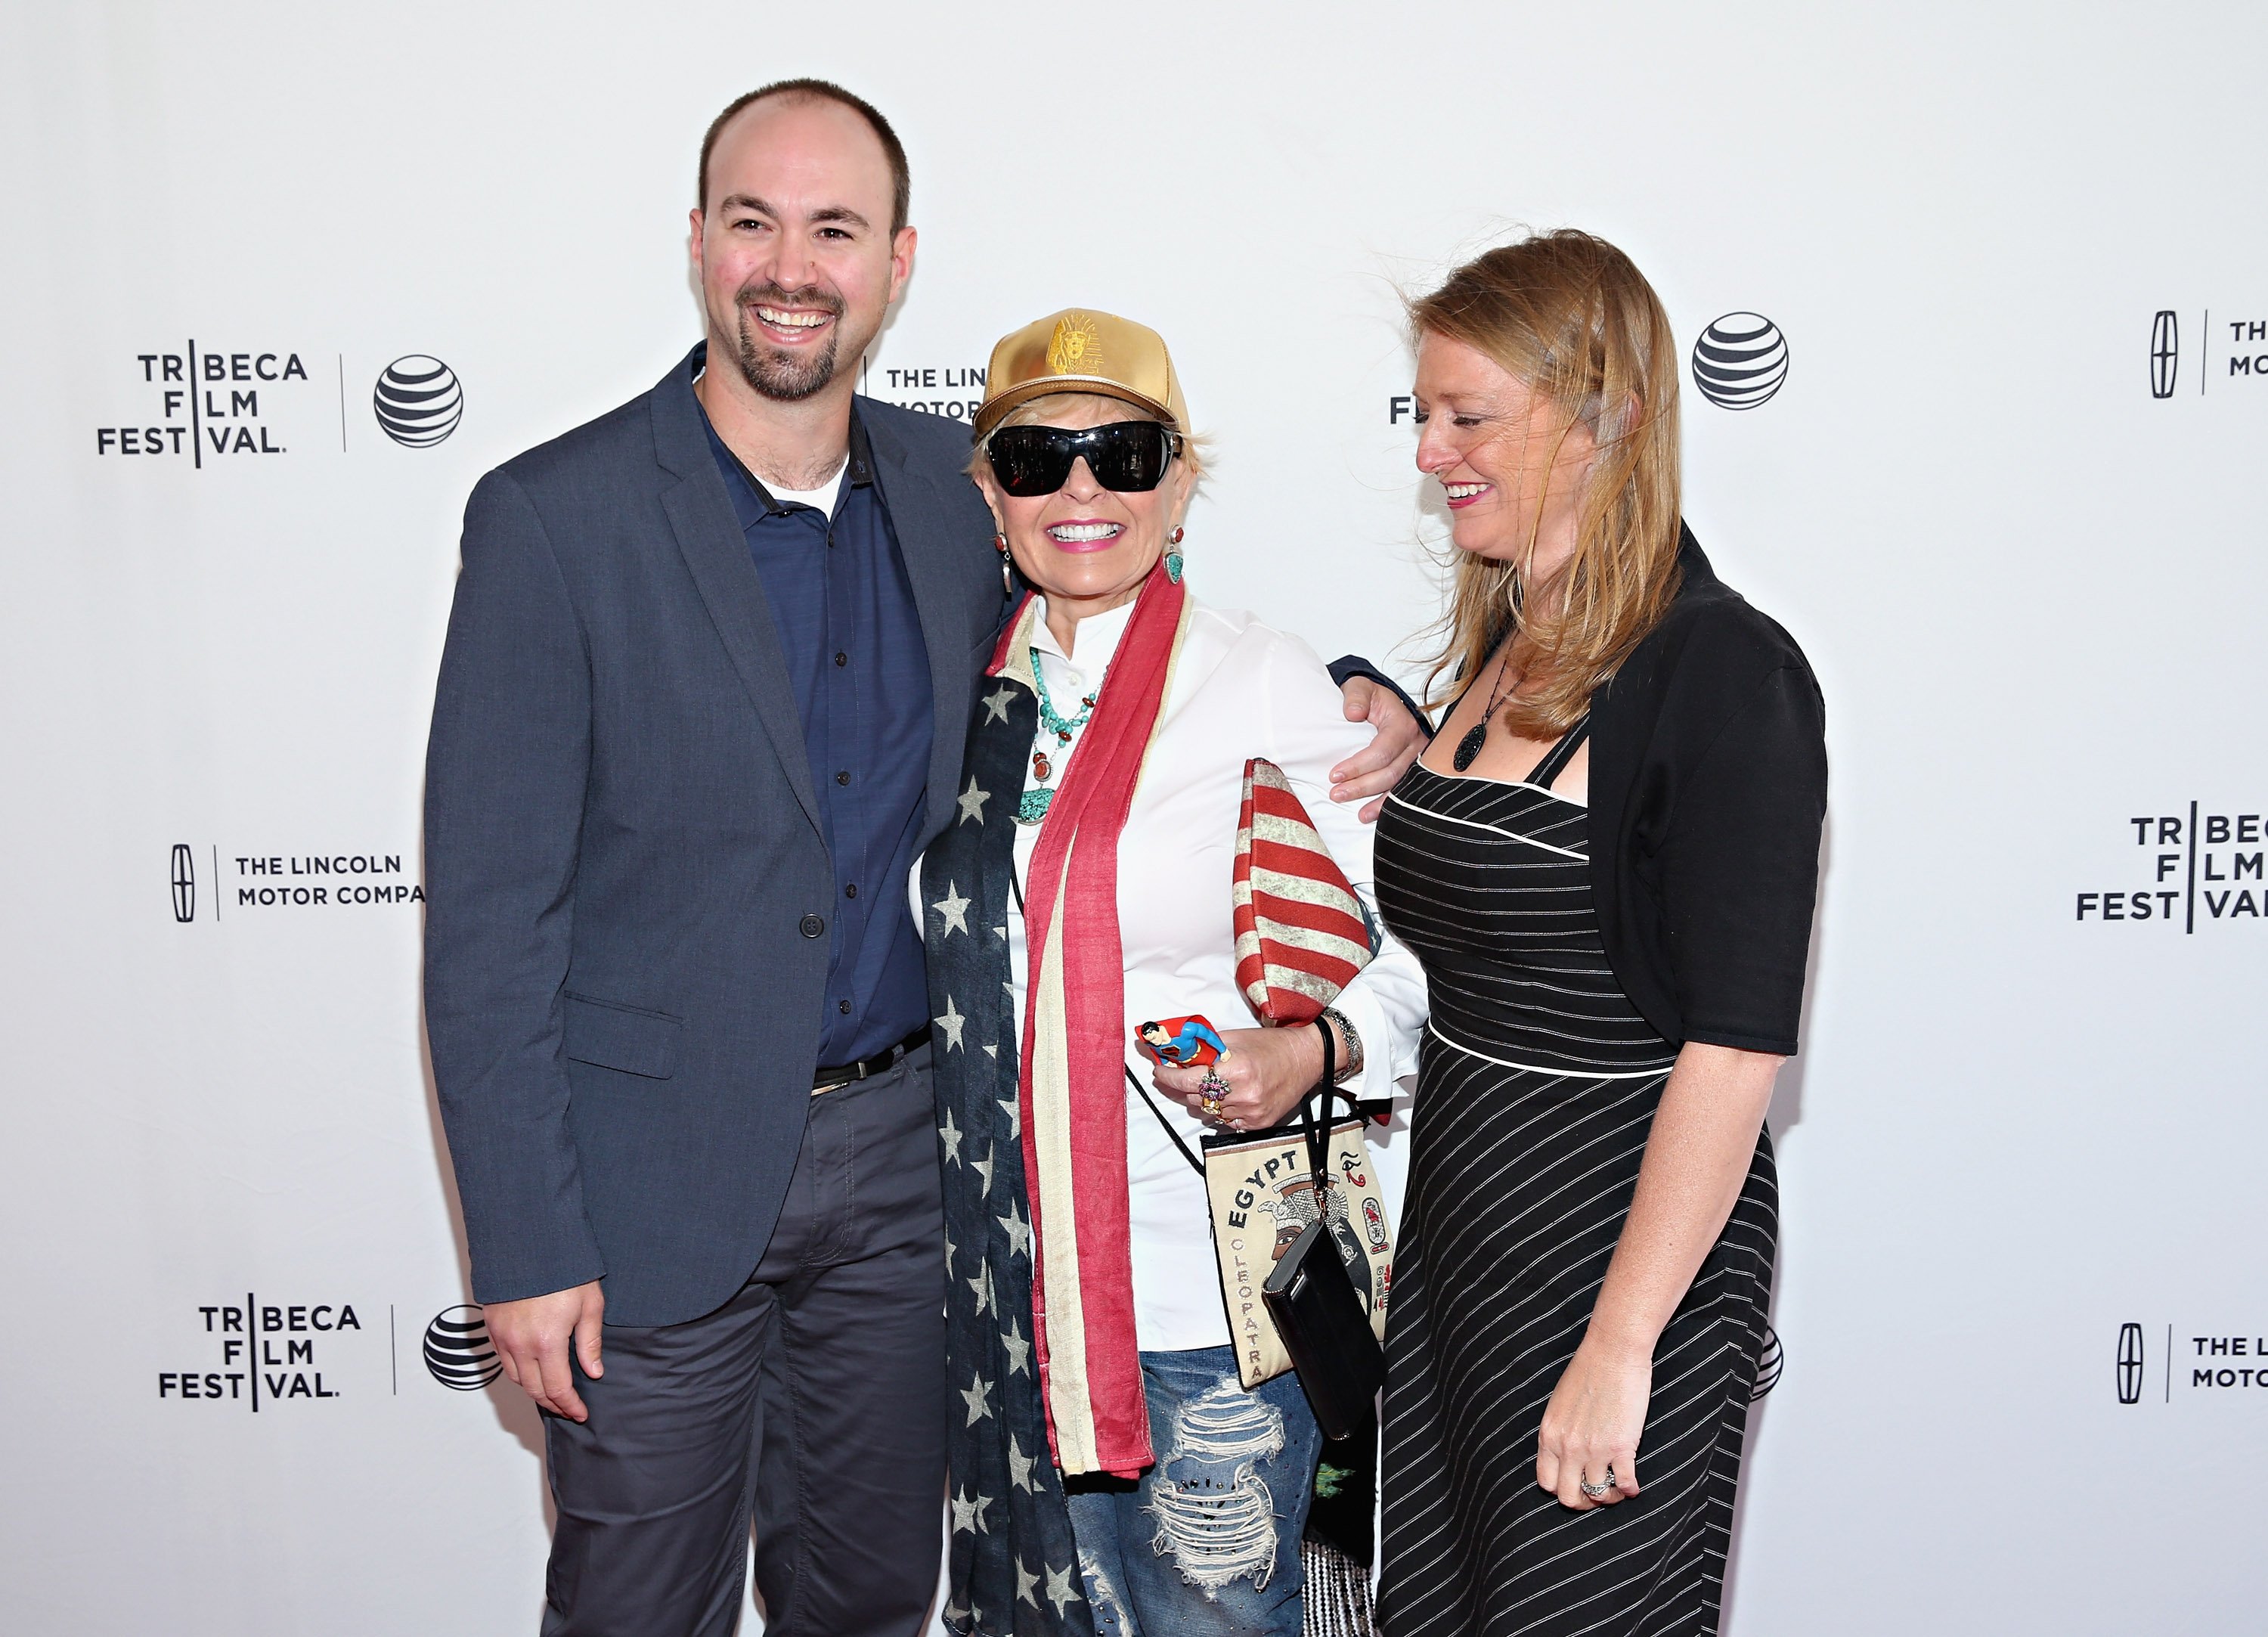 Jake Pentland, Roseanne Barr, and Brandi Brown at the world premiere of the documentary "Roseanne For President!" during the Tribeca Film Festival on April 18, 2015, in New York City. | Source: Getty Images